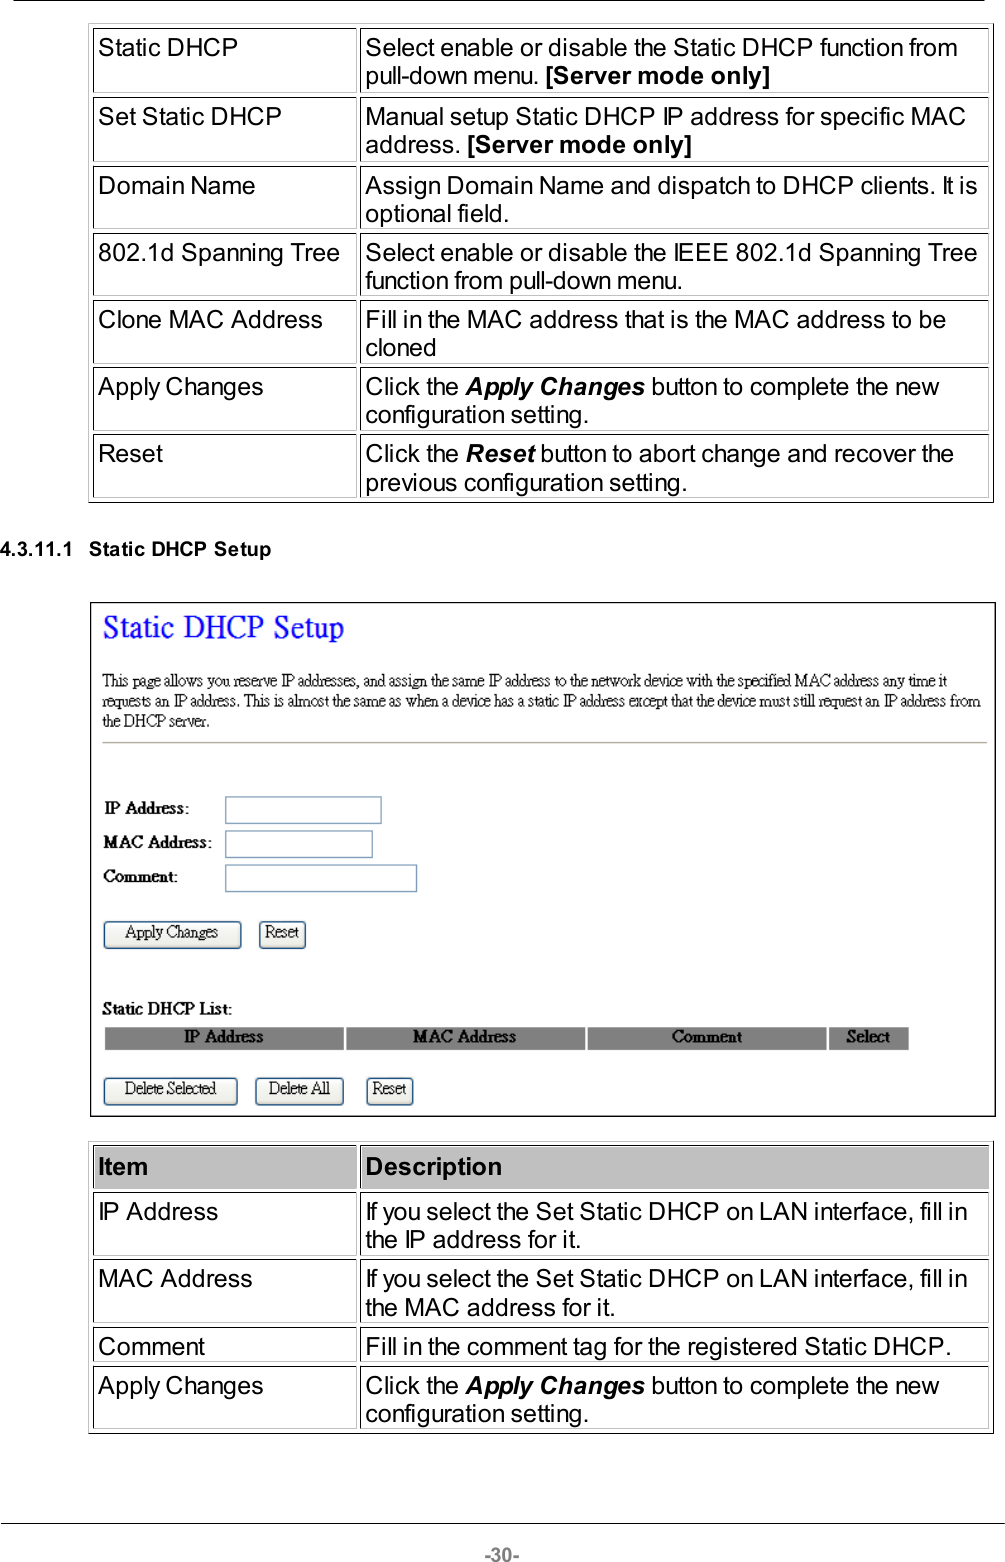 -30-Static DHCPSelect enable or disable the Static DHCP function frompull-down menu. [Server mode only]Set Static DHCPManual setup Static DHCP IP address for specific MACaddress. [Server mode only]Domain NameAssign Domain Name and dispatch to DHCP clients. It isoptional field.802.1d Spanning TreeSelect enable or disable the IEEE 802.1d Spanning Treefunction from pull-down menu.Clone MAC AddressFill in the MAC address that is the MAC address to beclonedApply ChangesClick the Apply Changes button to complete the newconfiguration setting.ResetClick the Reset button to abort change and recover theprevious configuration setting.4.3.11.1 Static DHCP SetupItemDescriptionIP AddressIf you select the Set Static DHCP on LAN interface, fill inthe IP address for it.MAC AddressIf you select the Set Static DHCP on LAN interface, fill inthe MAC address for it.CommentFill in the comment tag for the registered Static DHCP.Apply ChangesClick the Apply Changes button to complete the newconfiguration setting.